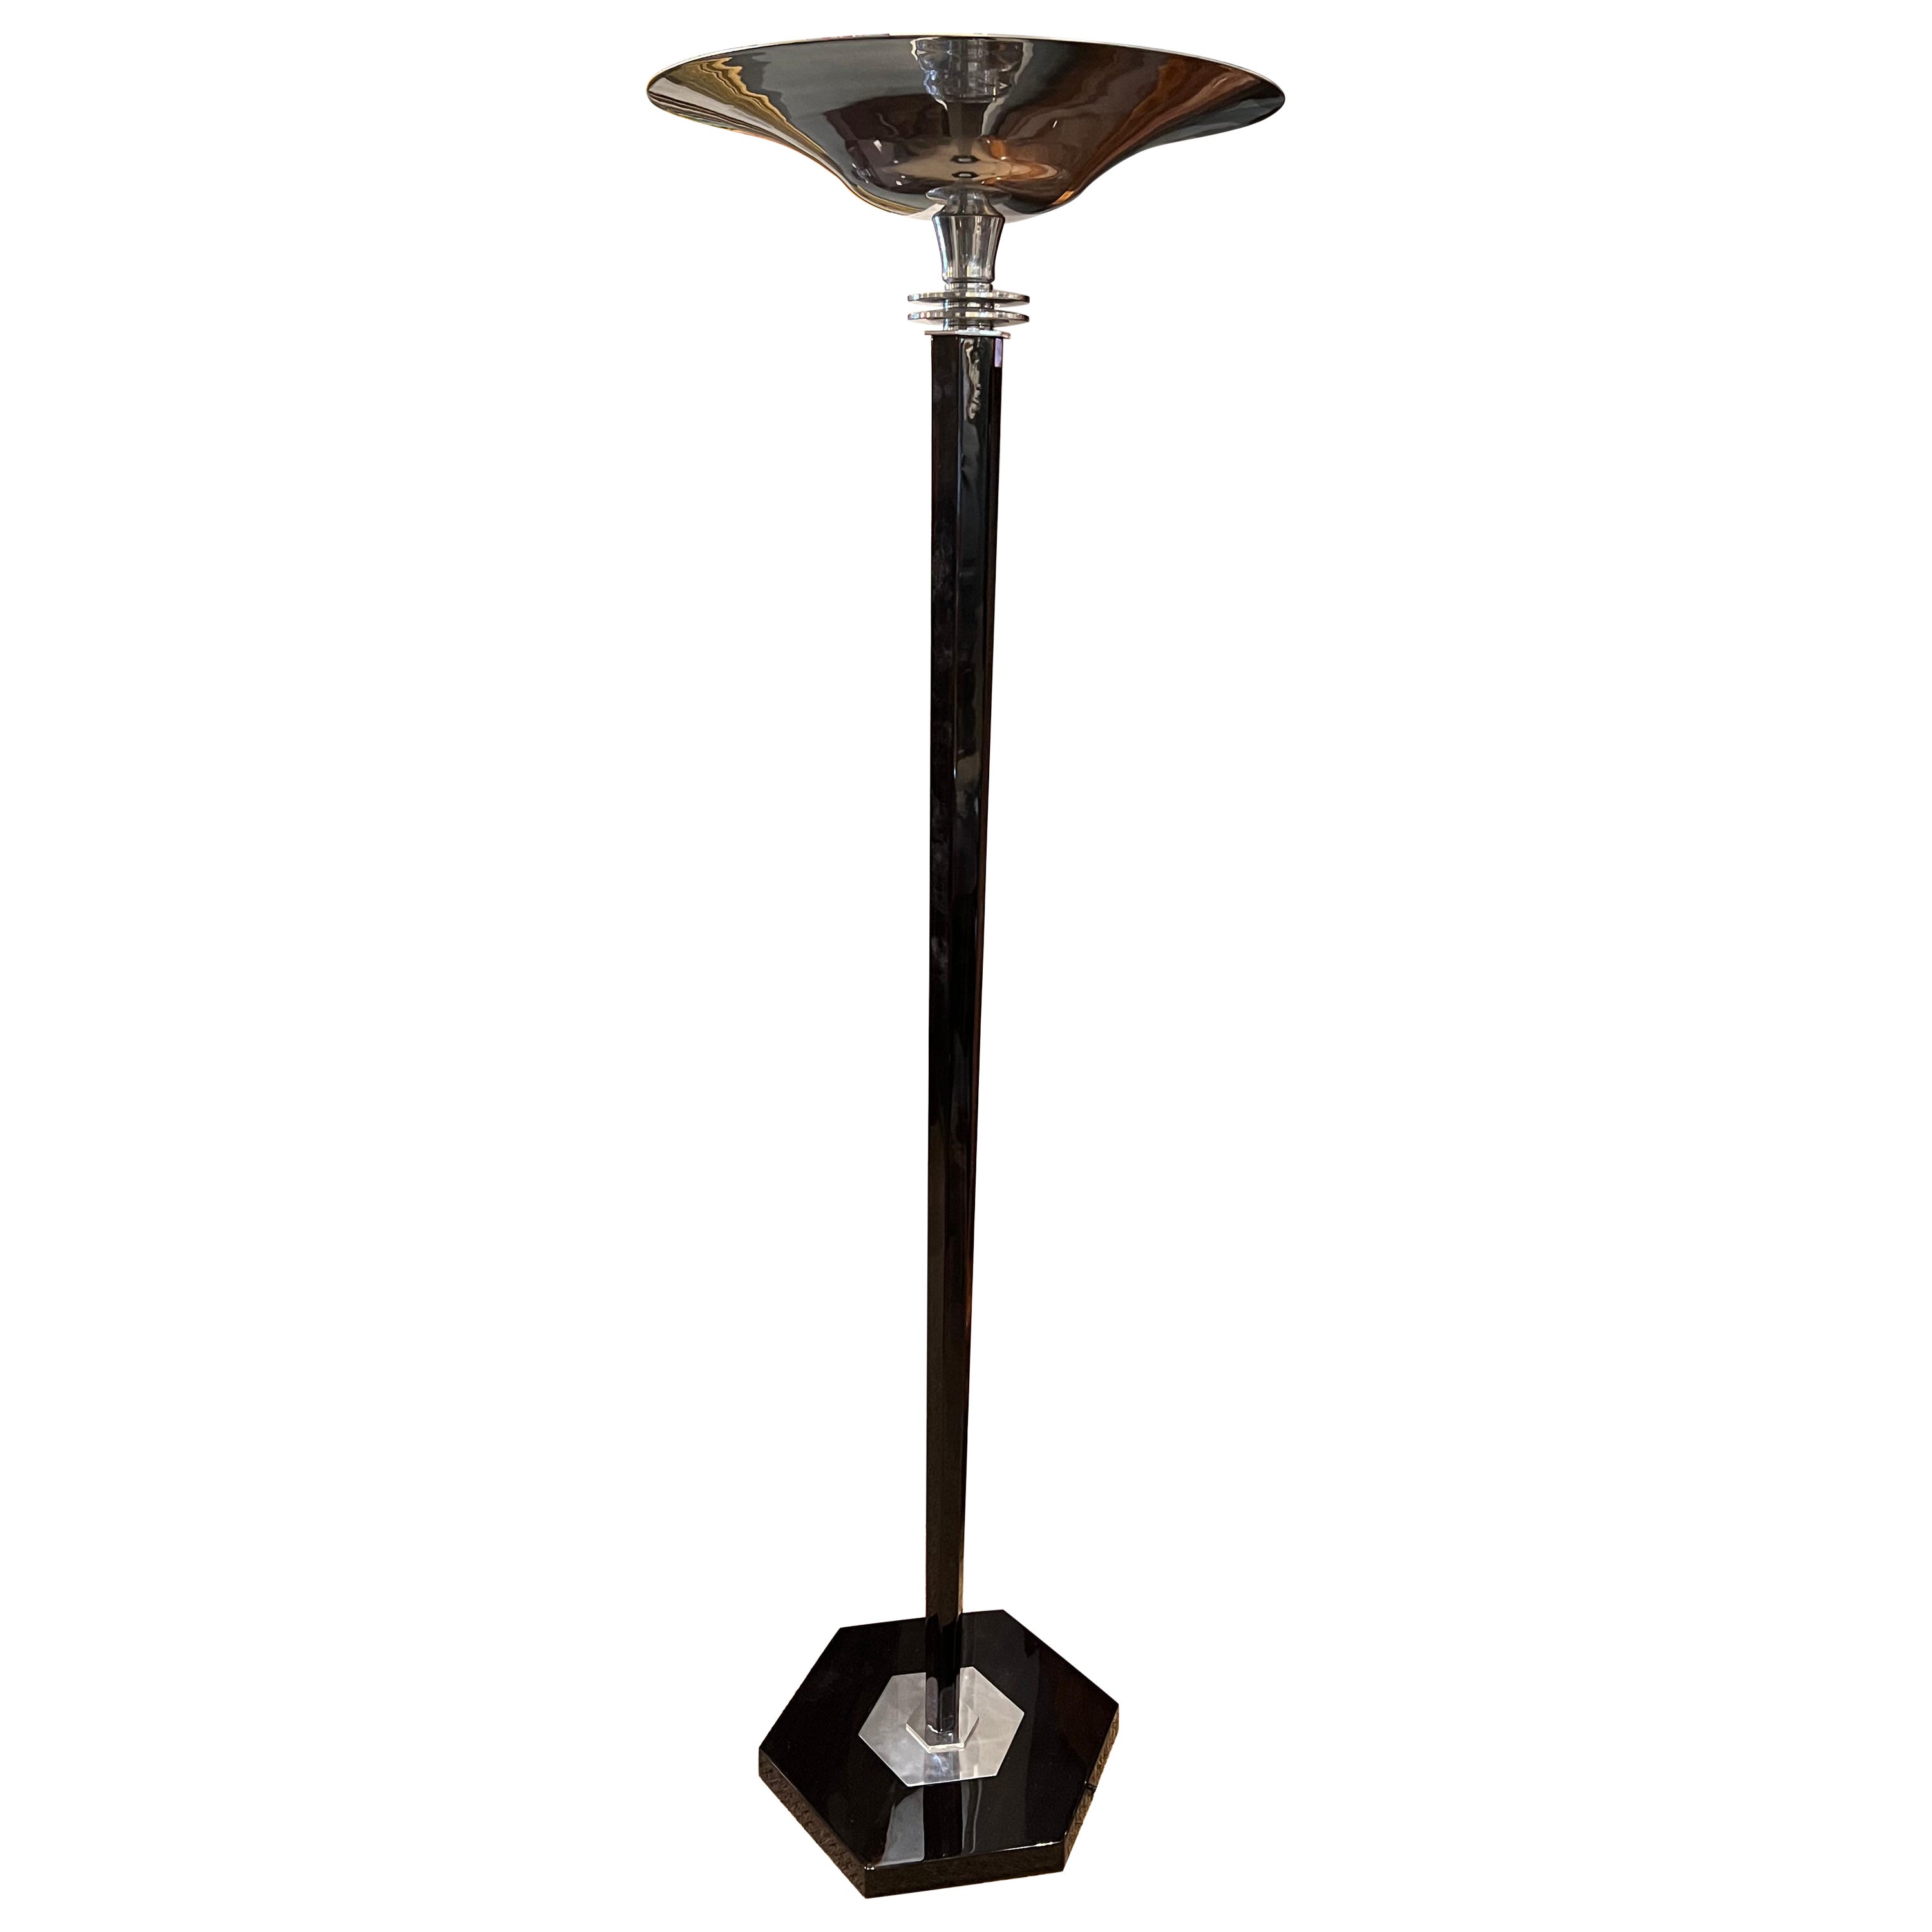 Art Deco French Floor Lamp in Beech Wood with Chrome For Sale